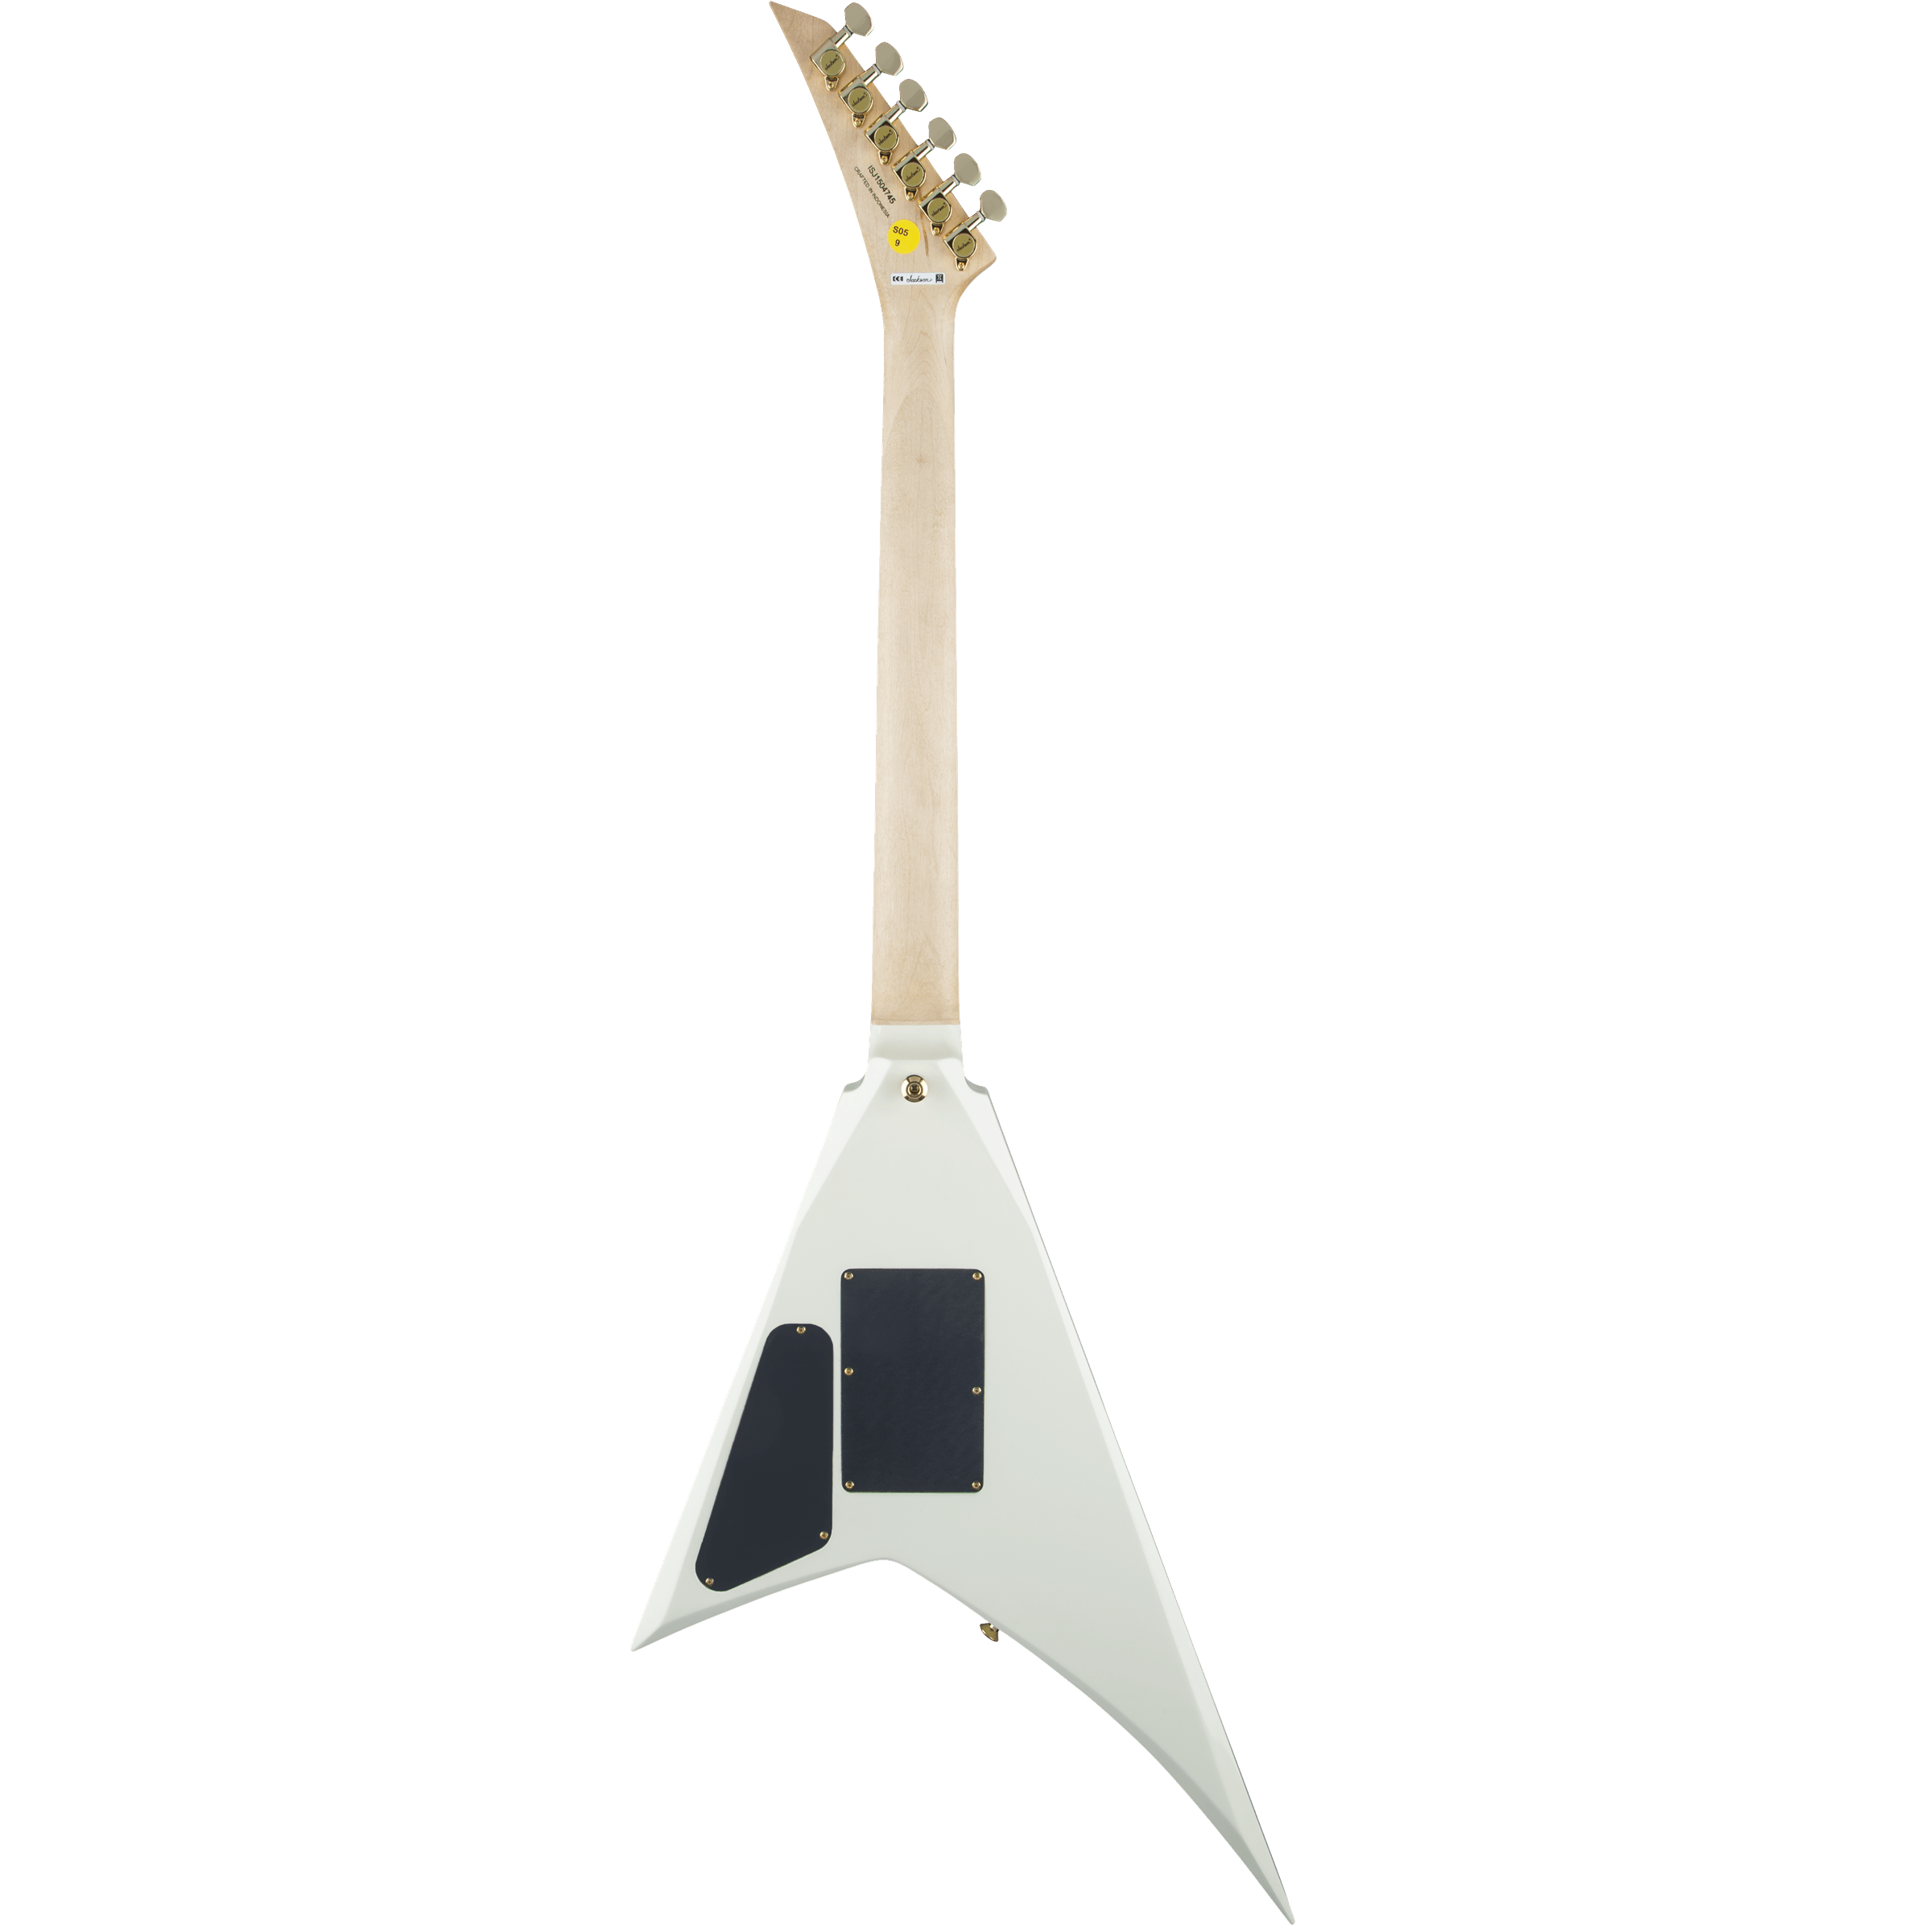 Pro Series Rhoads Rr3 Ebony Fingerboard Ivory With Black Pinstripes - Guitars - Electric by Jackson at Muso's Stuff